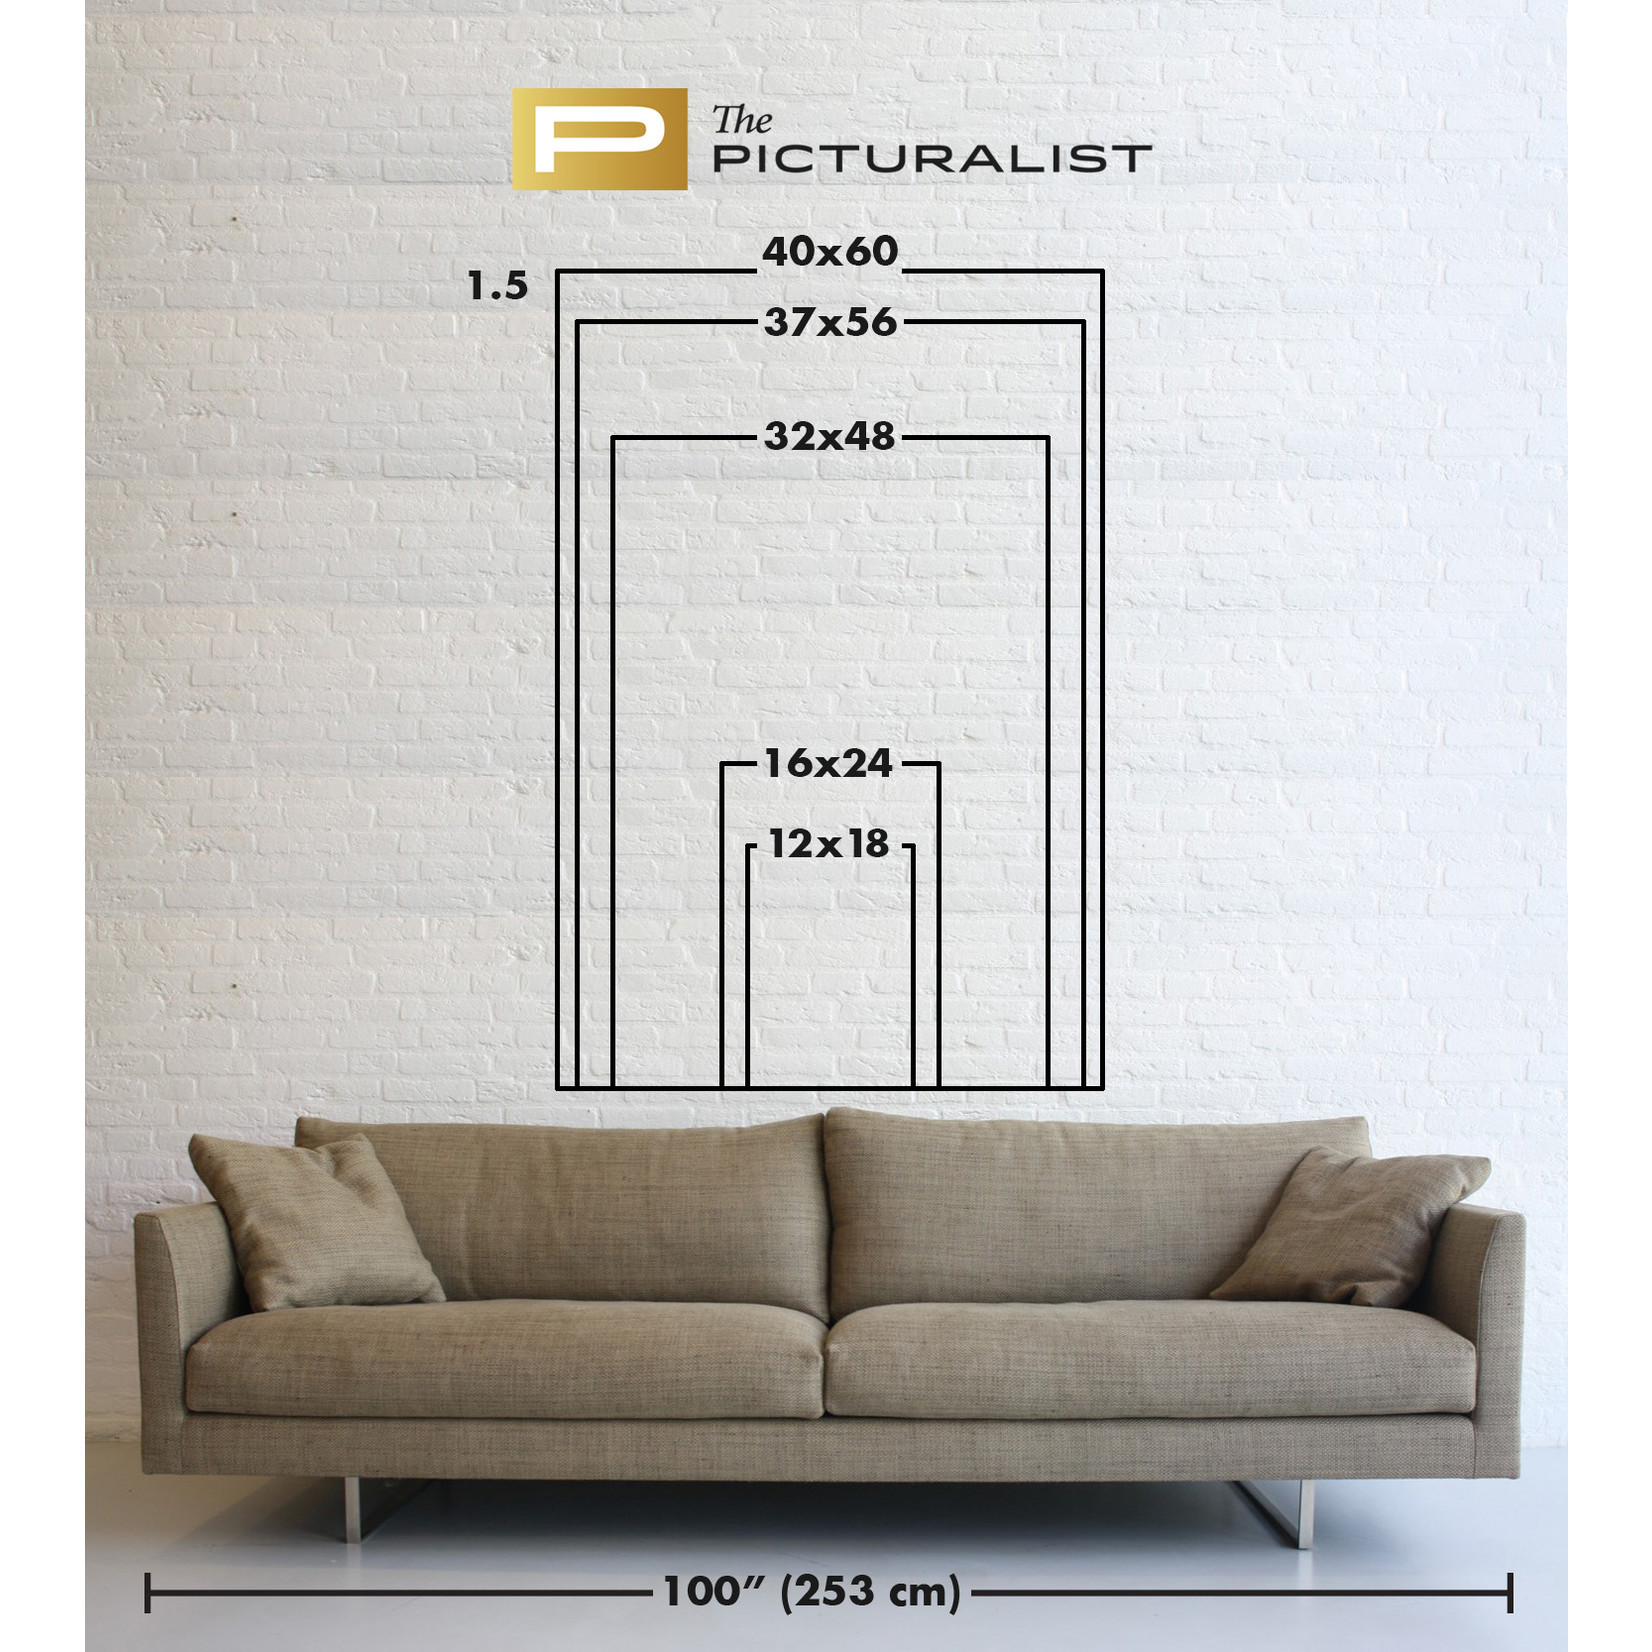 The Picturalist | Fine Art Prints on Paper Tall Series III by Francesco Alessandrini